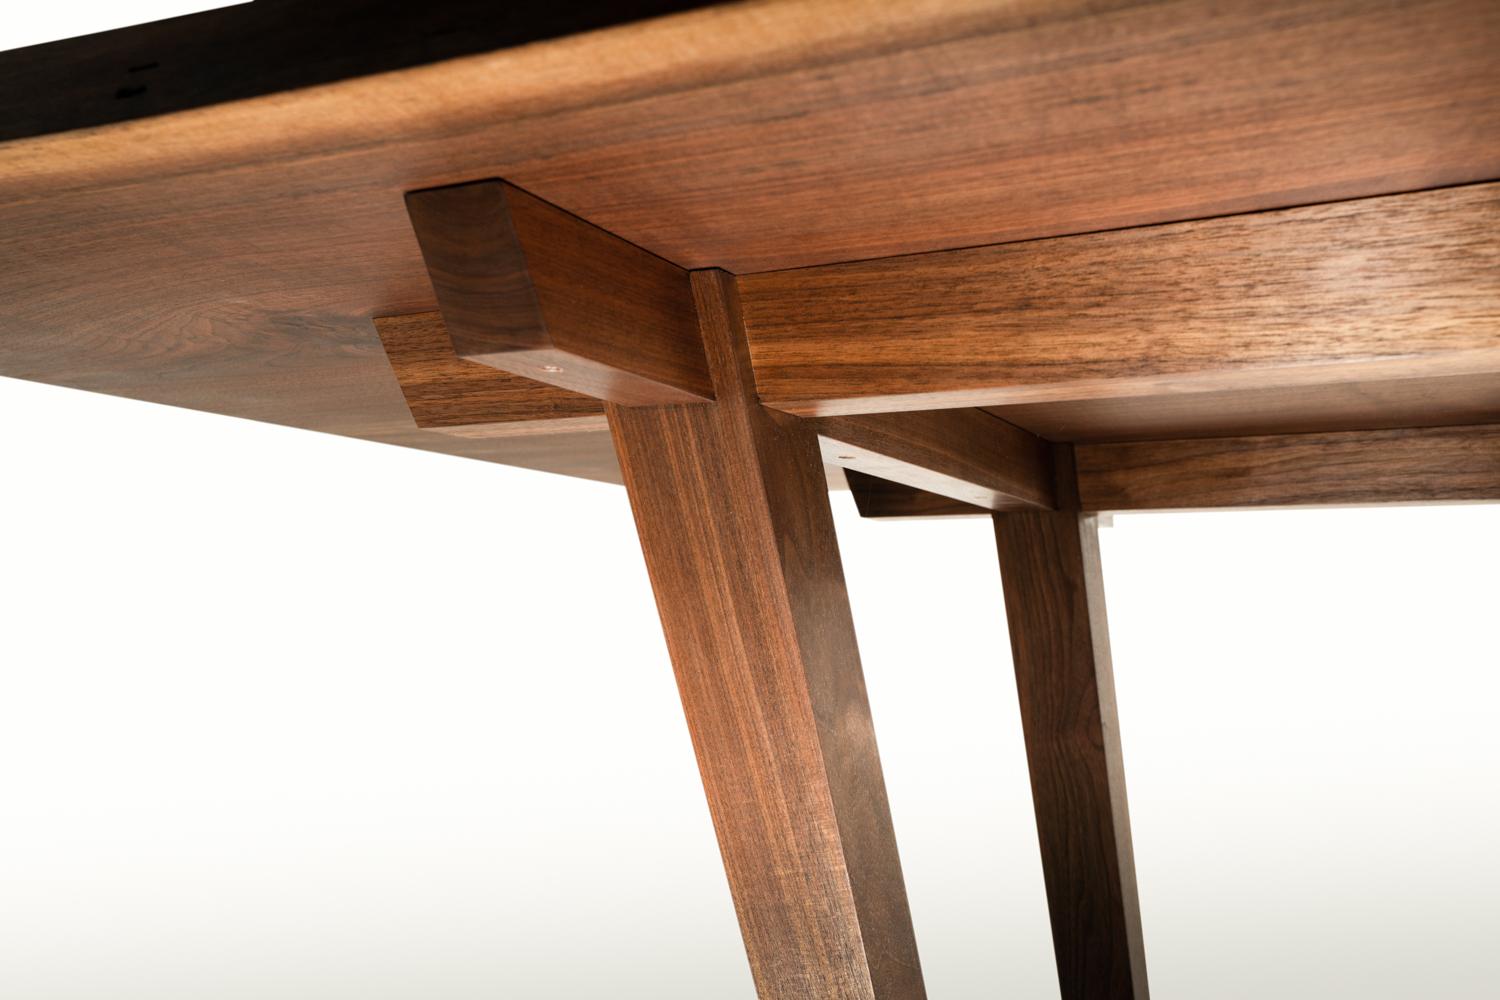 Original design of a splayed leg dining table featuring compound angled joinery. Taking inspiration from traditional japanese joinery elements, this table design uses interlocking joinery that utilizes the angle of the legs for ultimate strength.